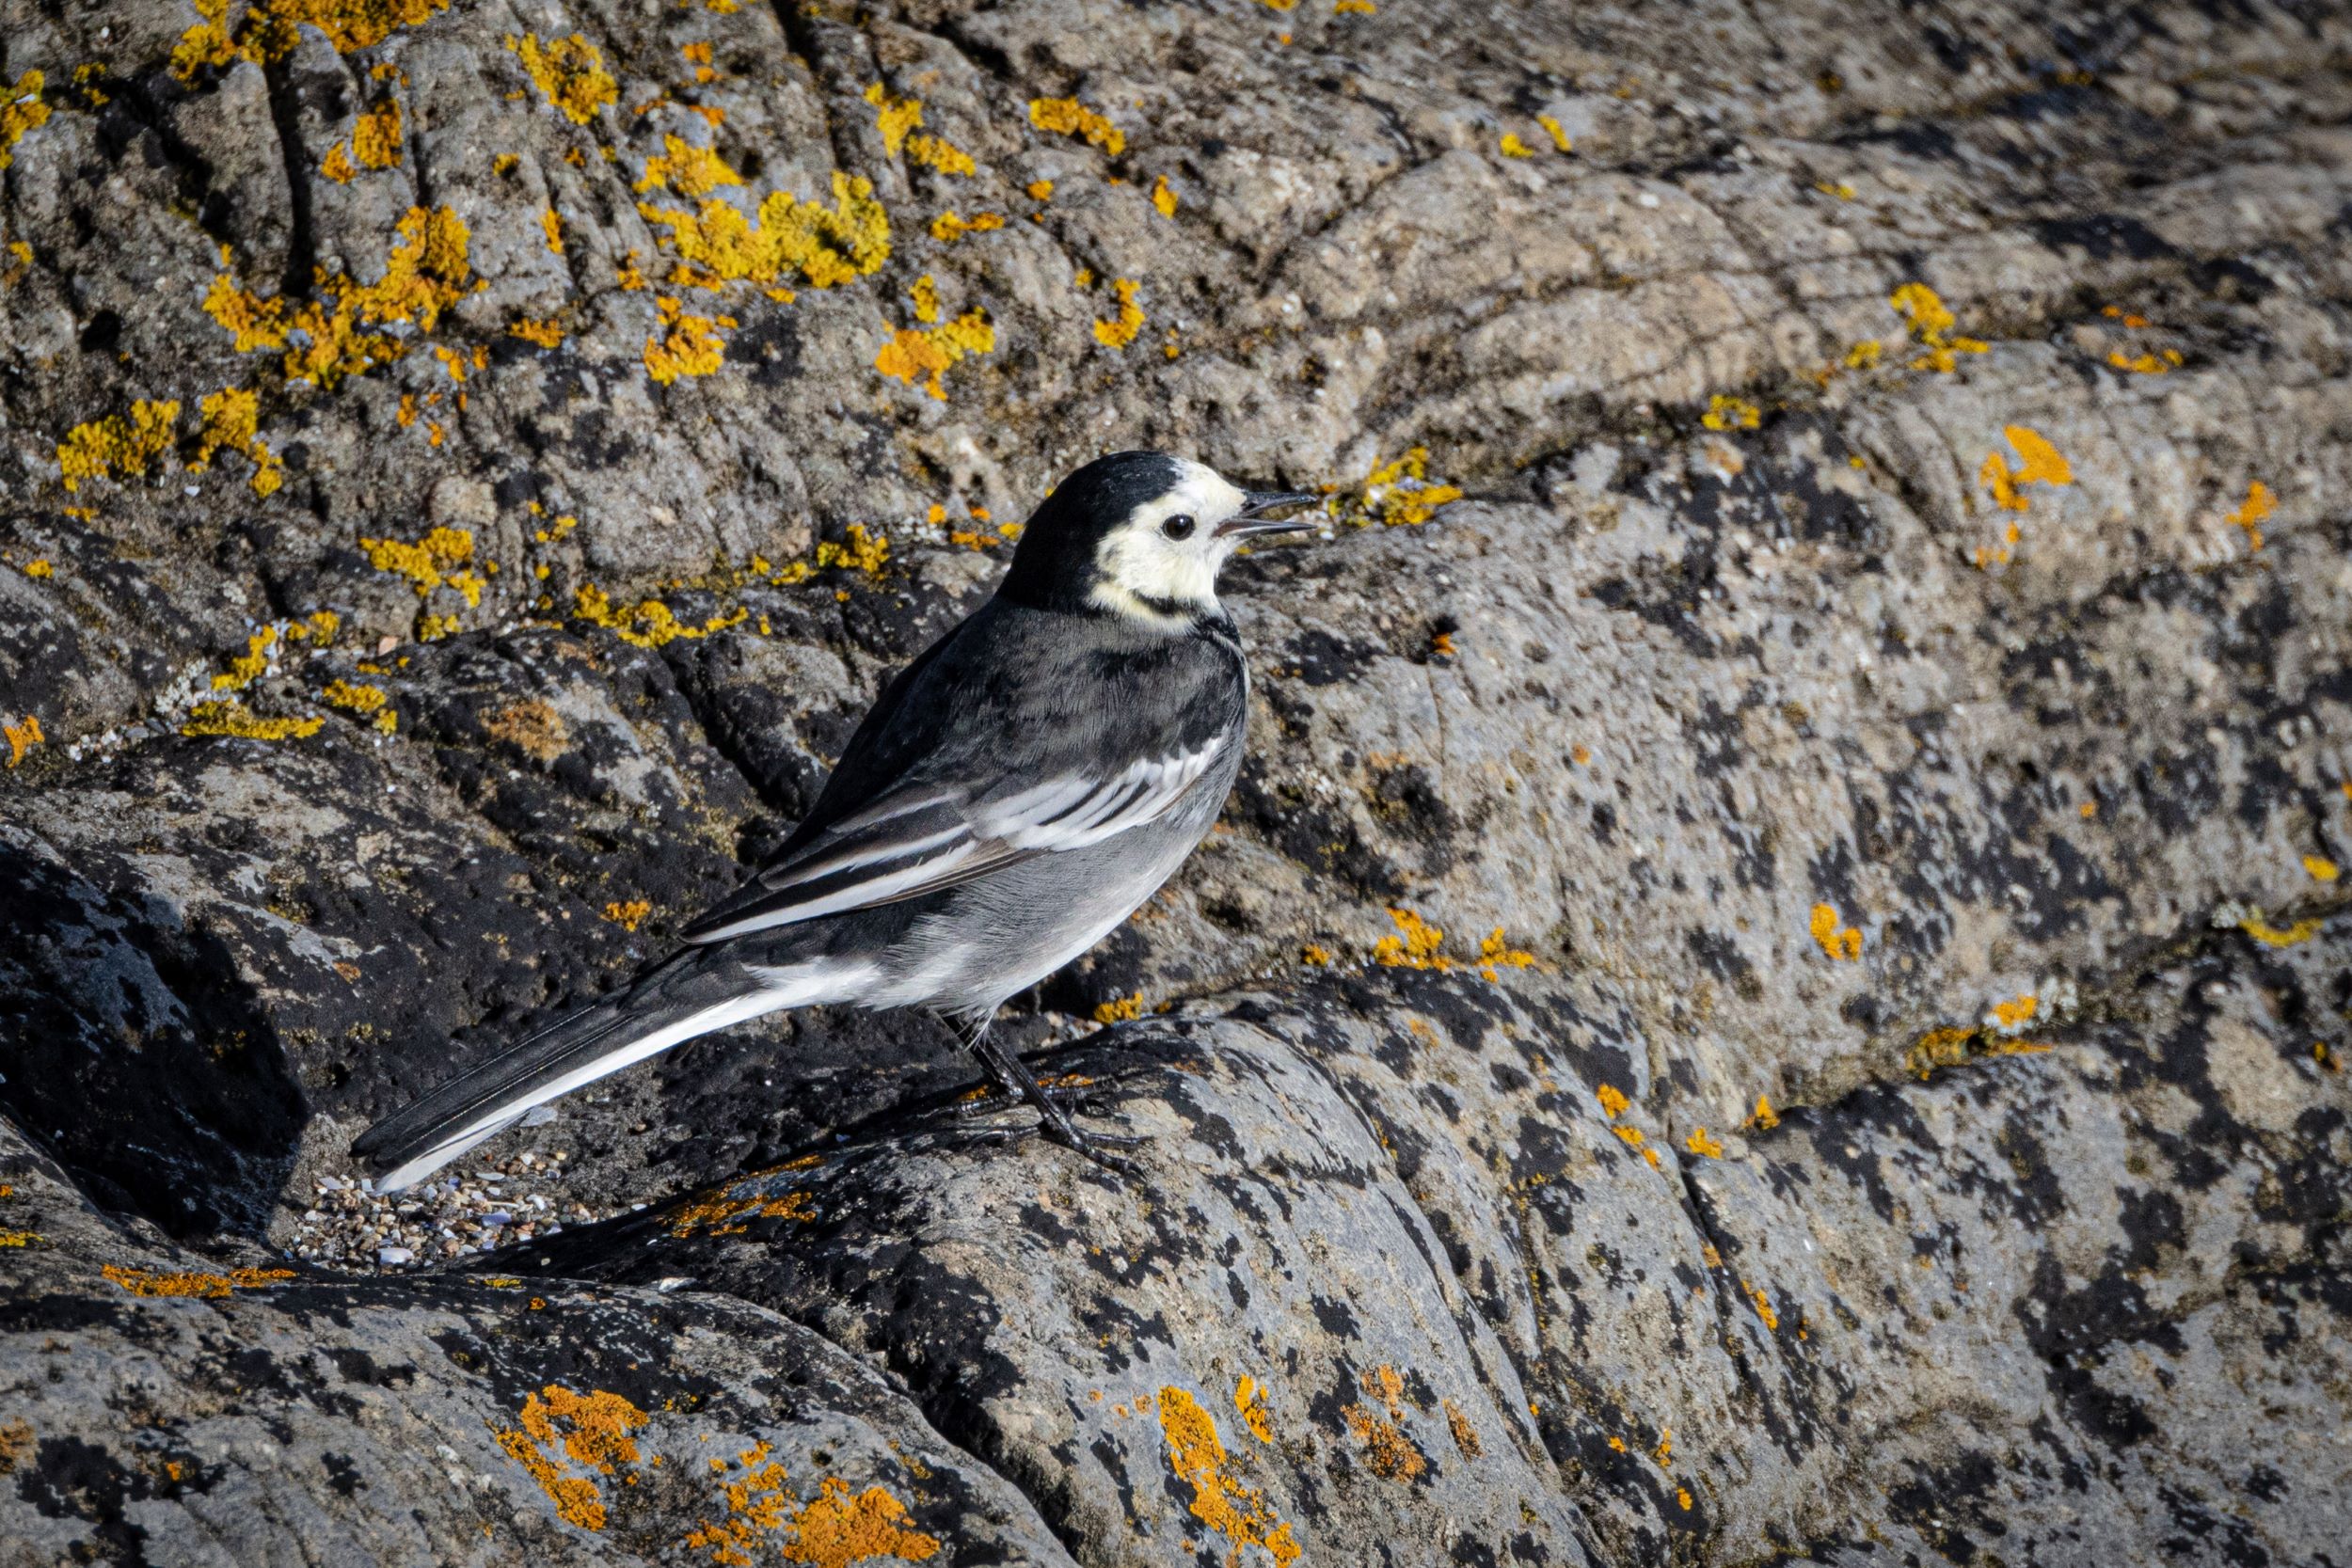 A Pied Wagtail on the rocky shoreline